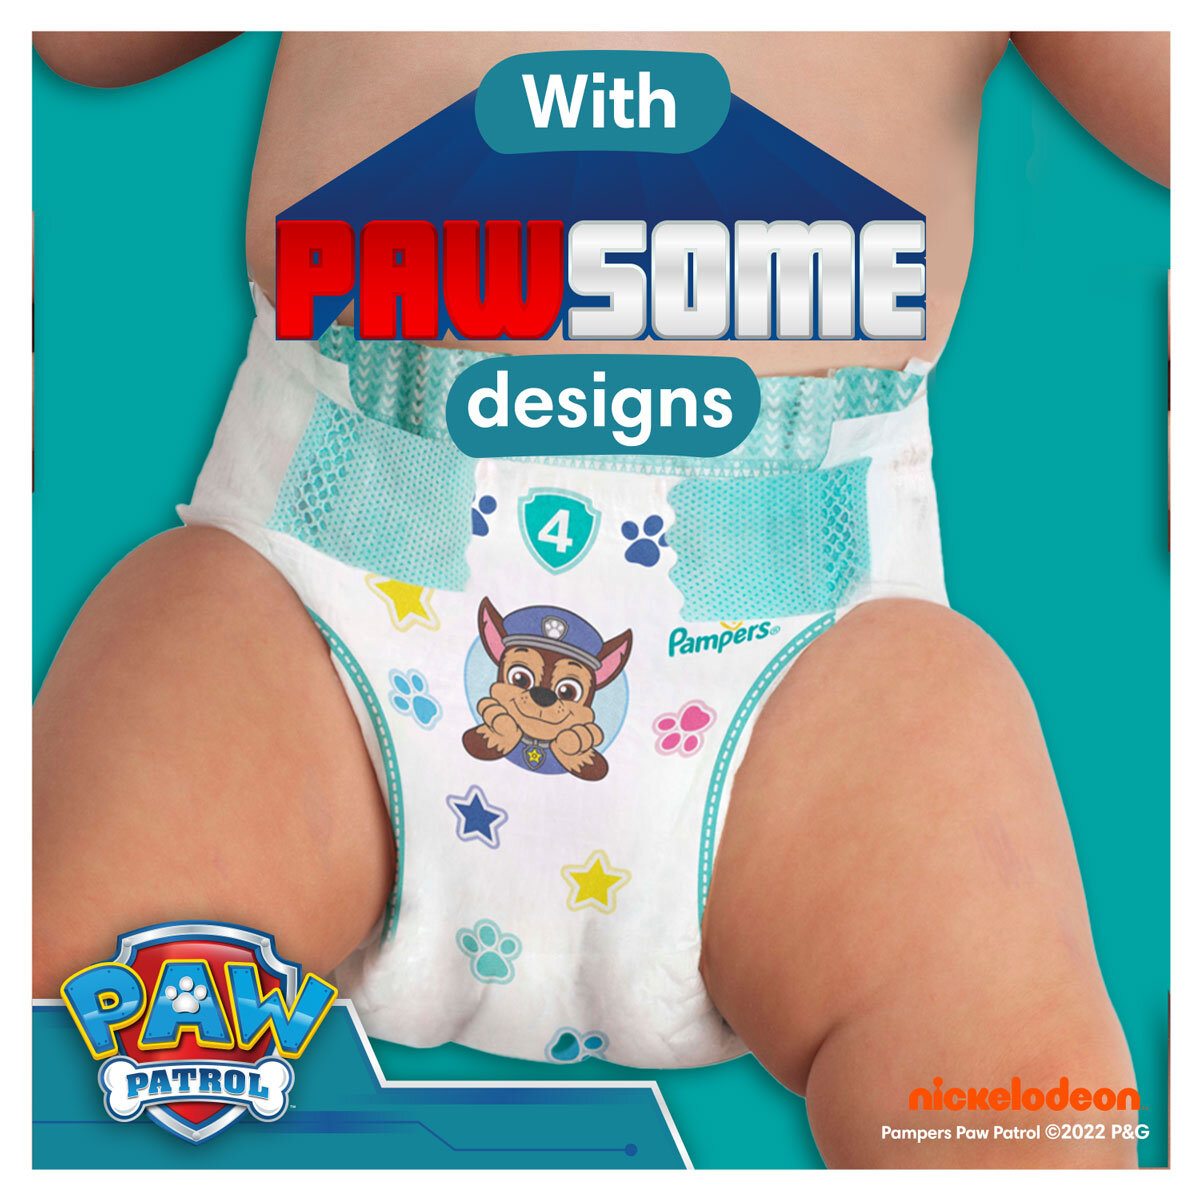 image to show the paw patrol design